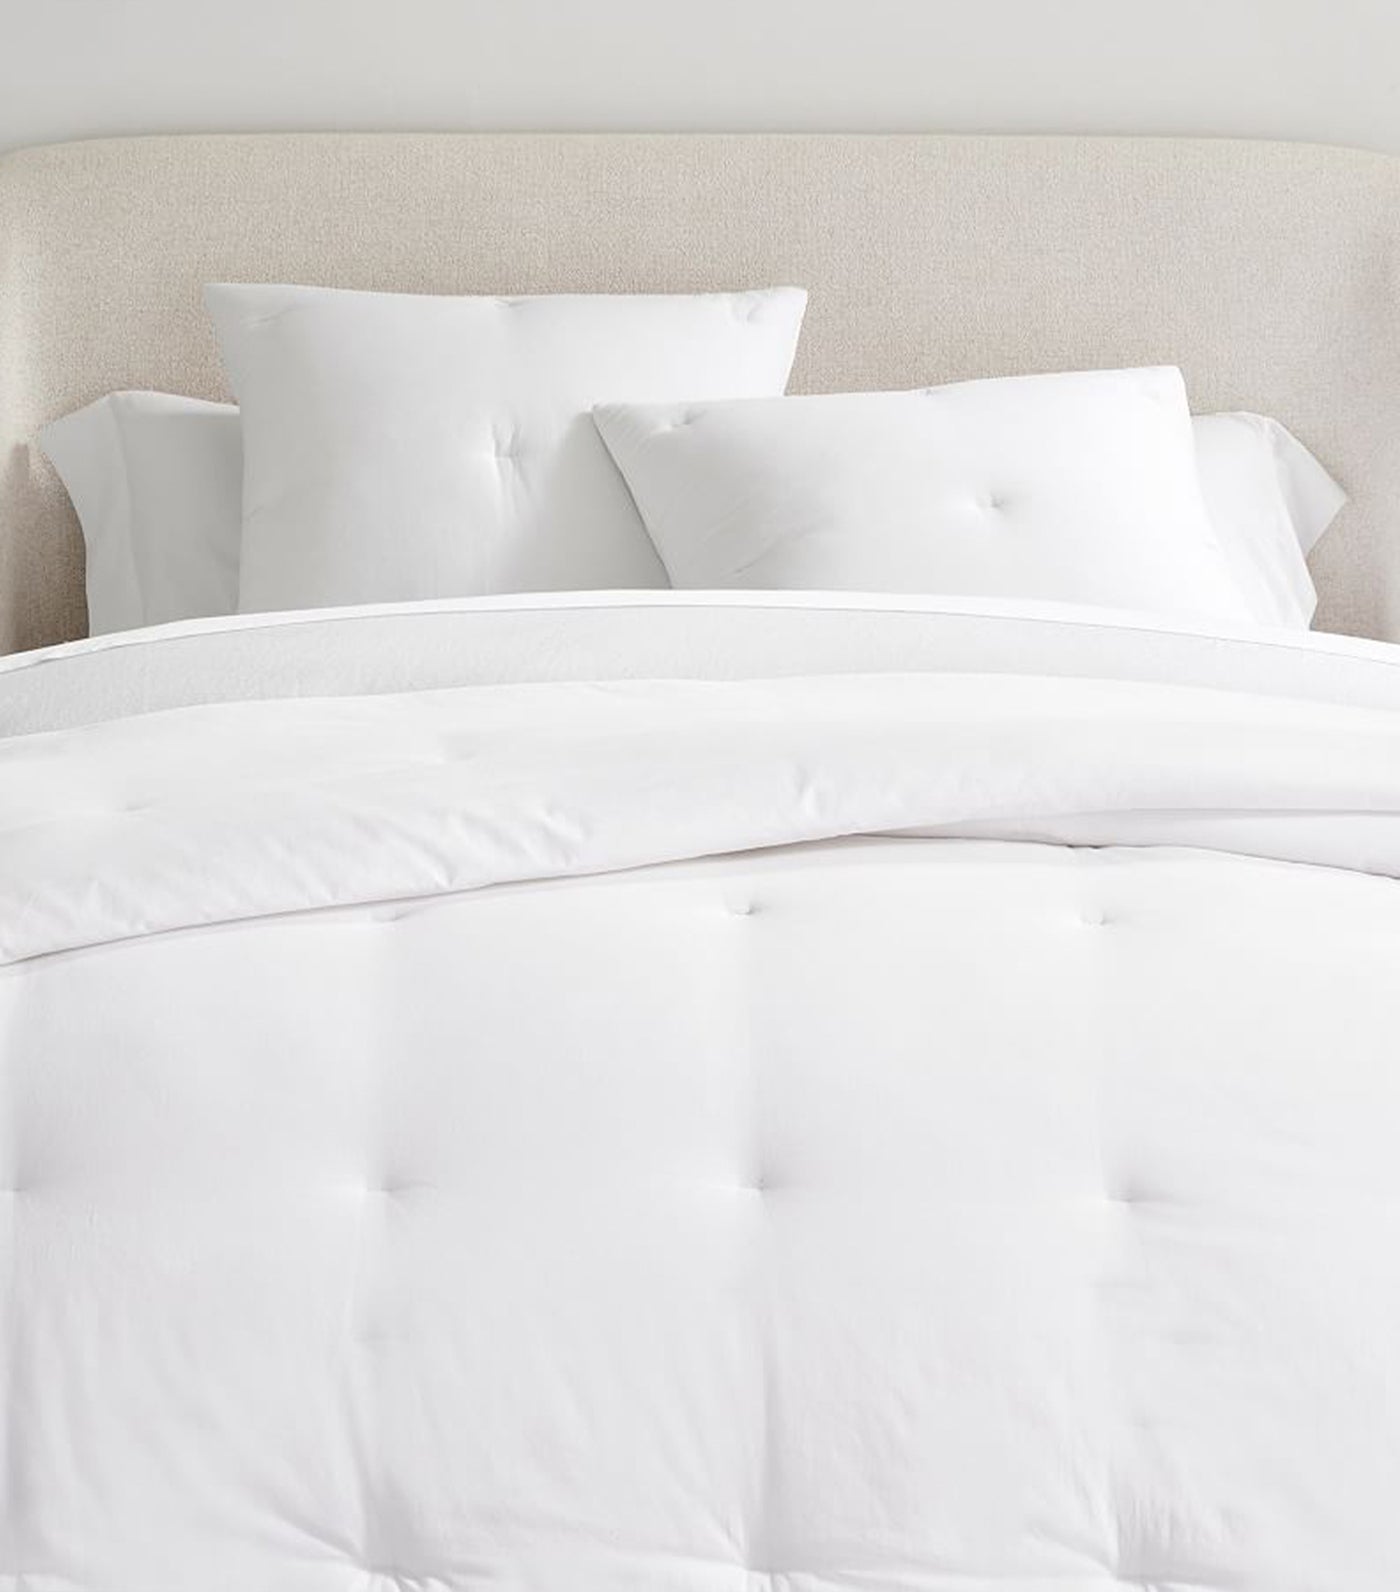 Pottery Barn Dream Brushed Organic Cotton Comforter and Shams - White